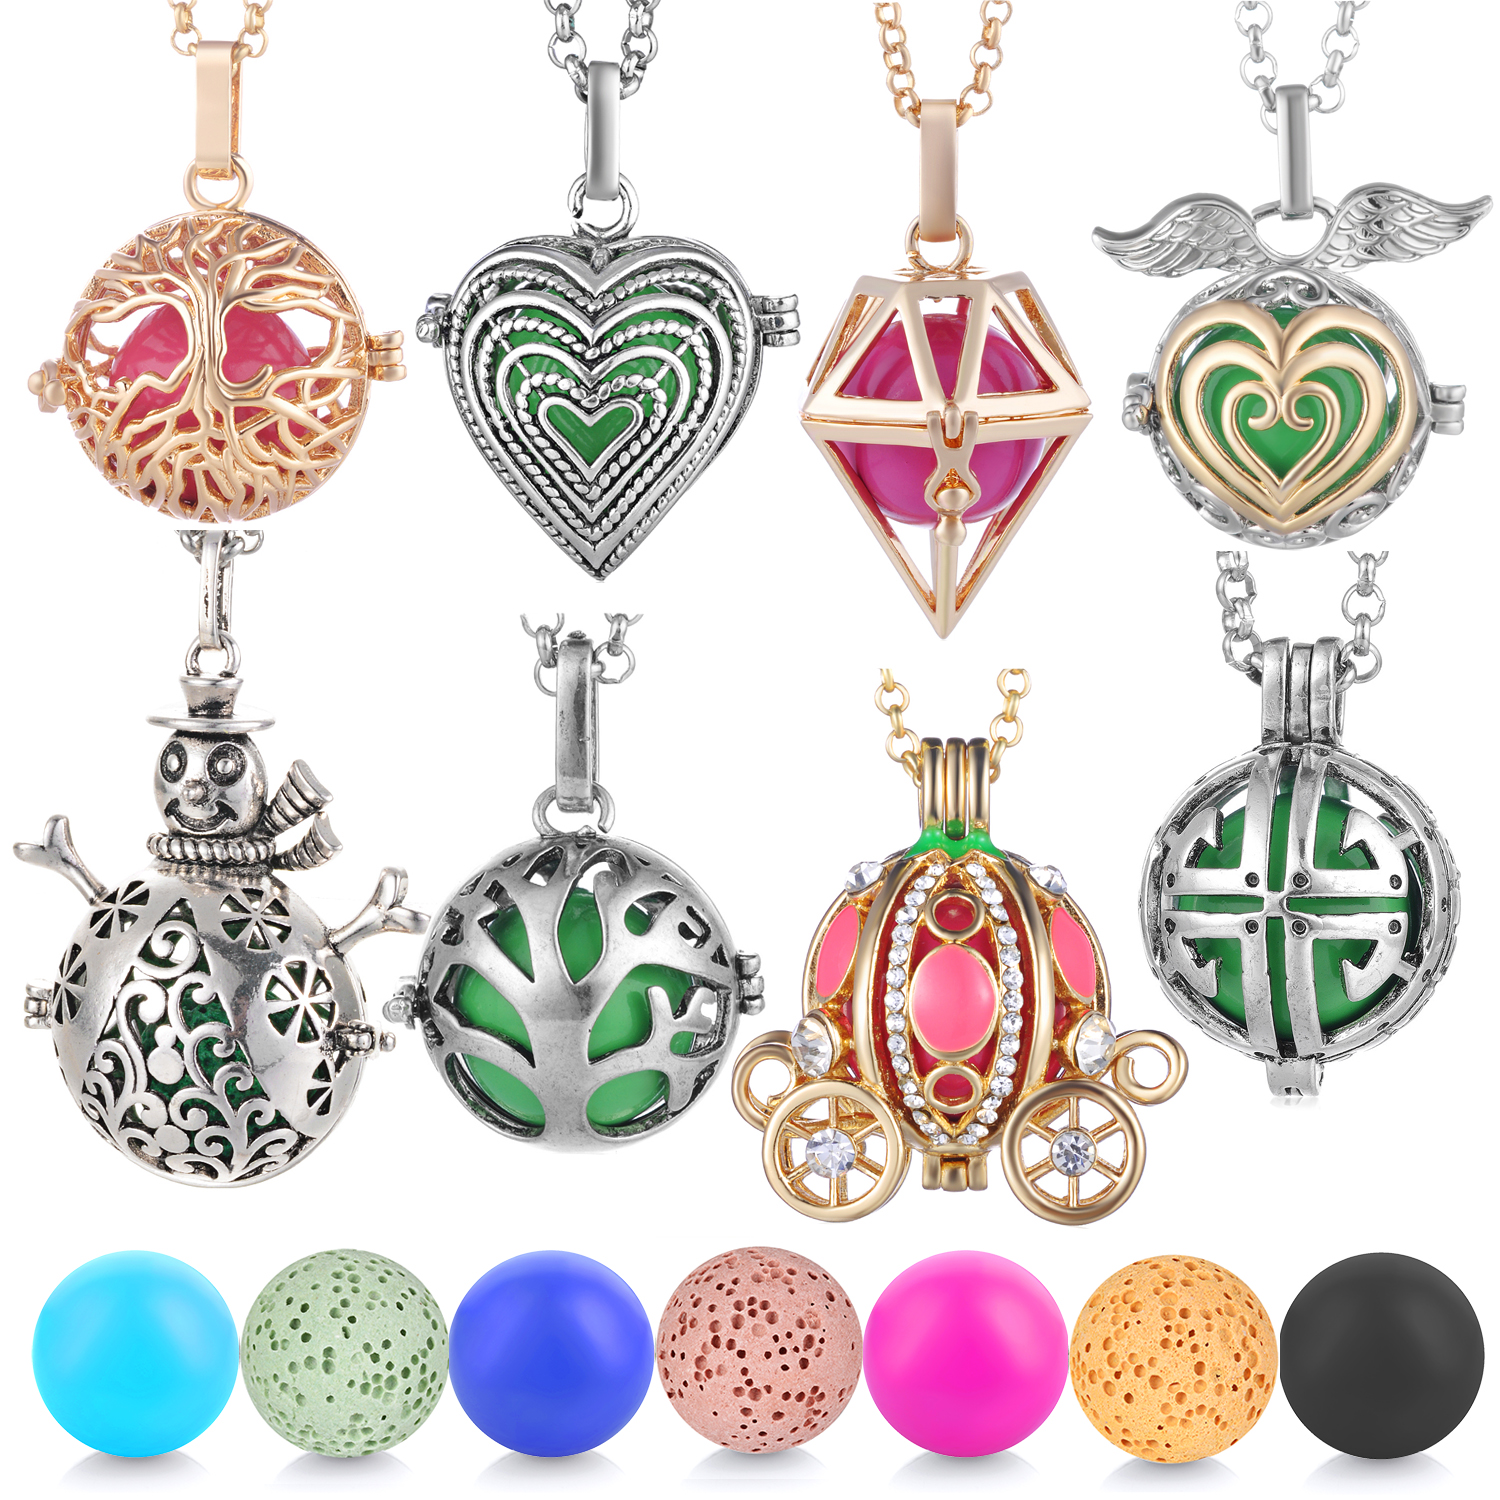 

Harmony Bola Locket open Cage Pendant for Angel Caller Chime Ball Mexcian Bola Floating Lockets Charms VA-252